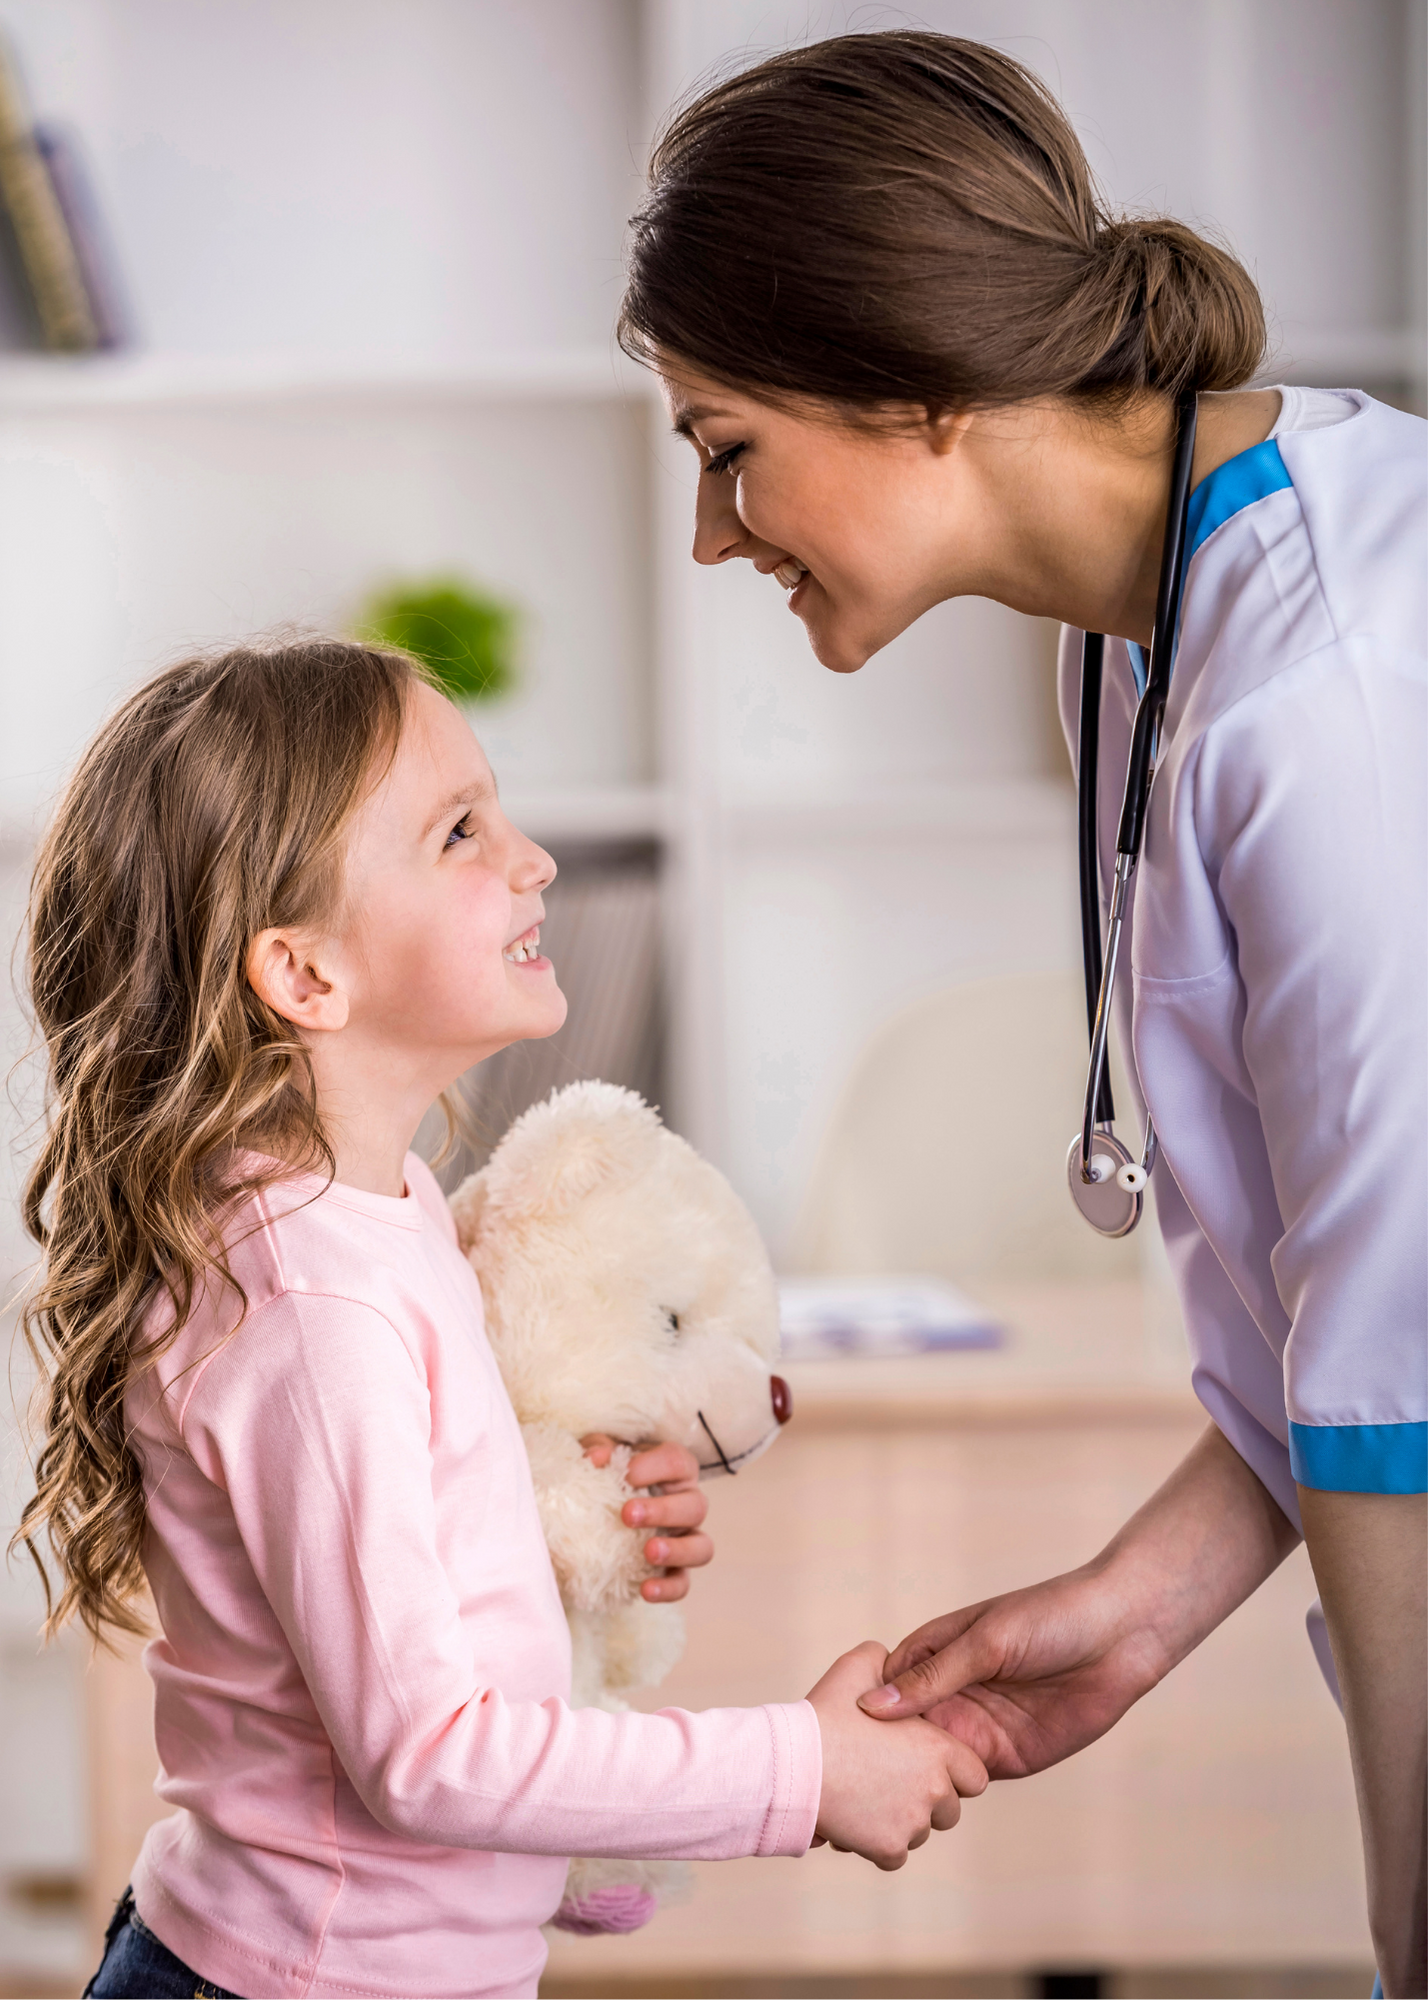 A female doctor shaking hands with a female child holding a teddy bear